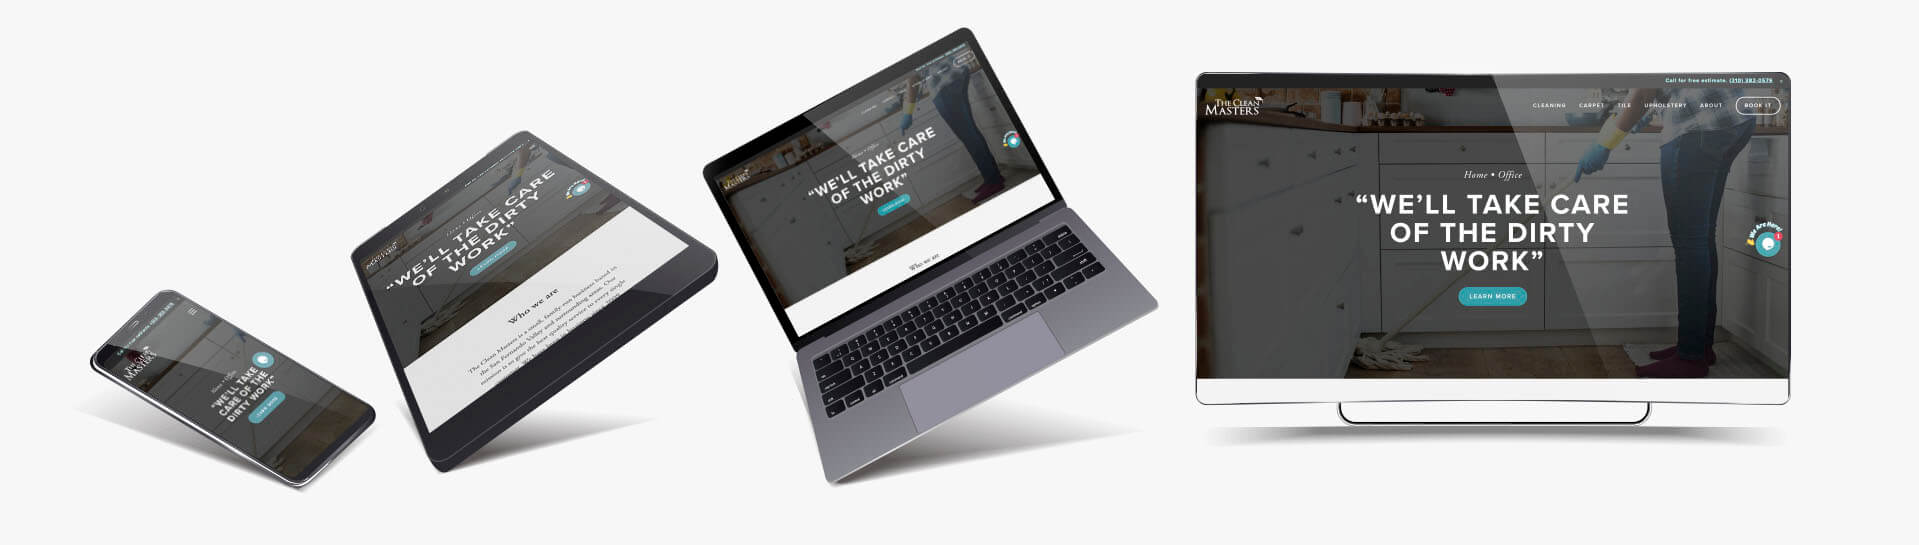 The Clean Masters website shown on multiple devices